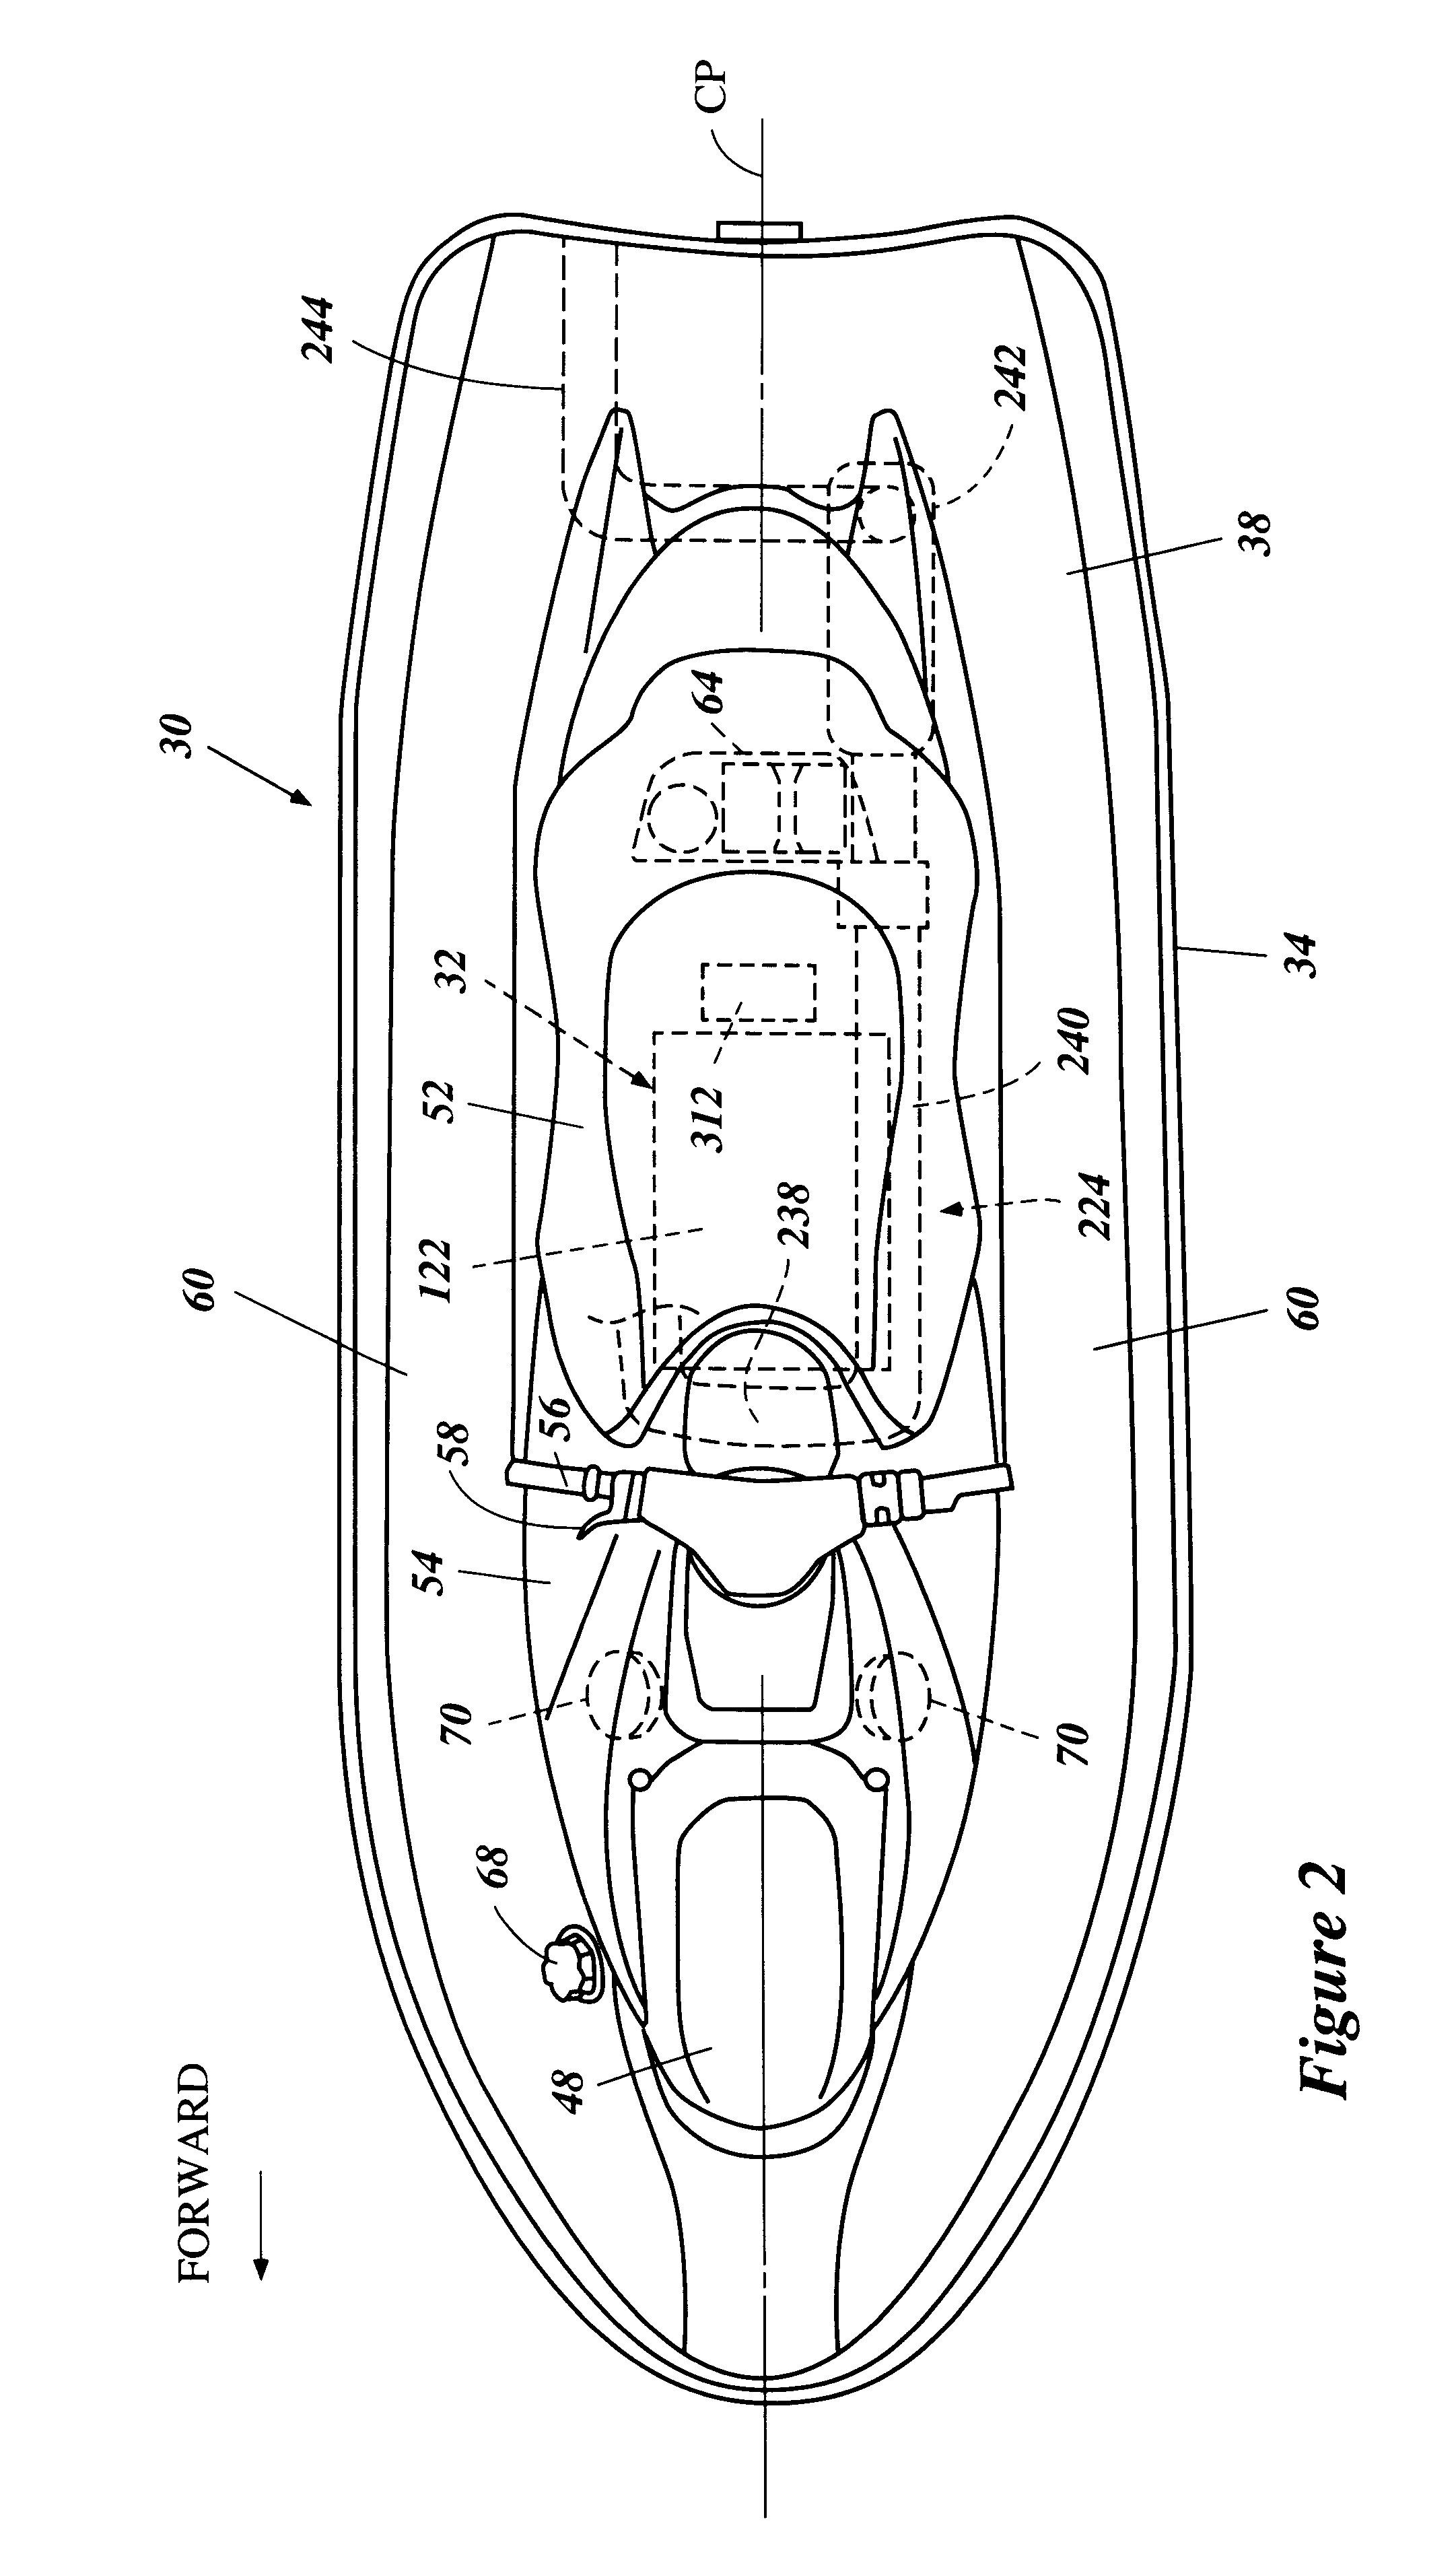 Exhaust system for 4-cycle engine of small watercraft